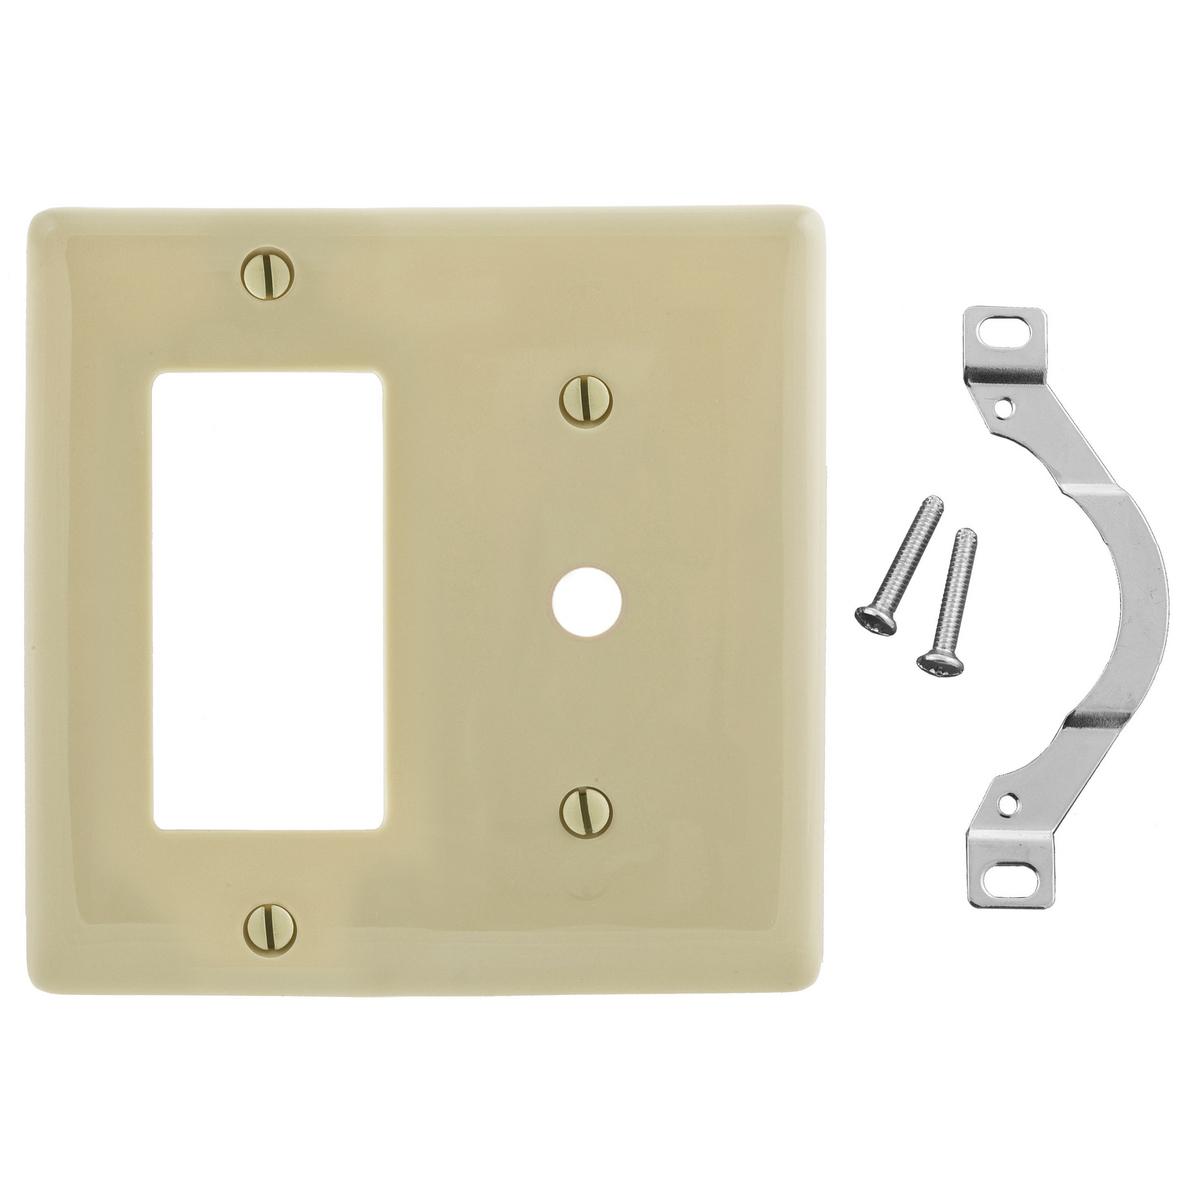 Hubbell NP1226I Wallplates, Nylon, 2-Gang, 1) Decorator, 1) .406" Opening, Ivory  ; Reinforcement ribs for extra strength ; High-impact, self-extinguishing nylon material ; Captive screw feature holds mounting screw in place ; Standard Size is 1/8" larger to give you ext